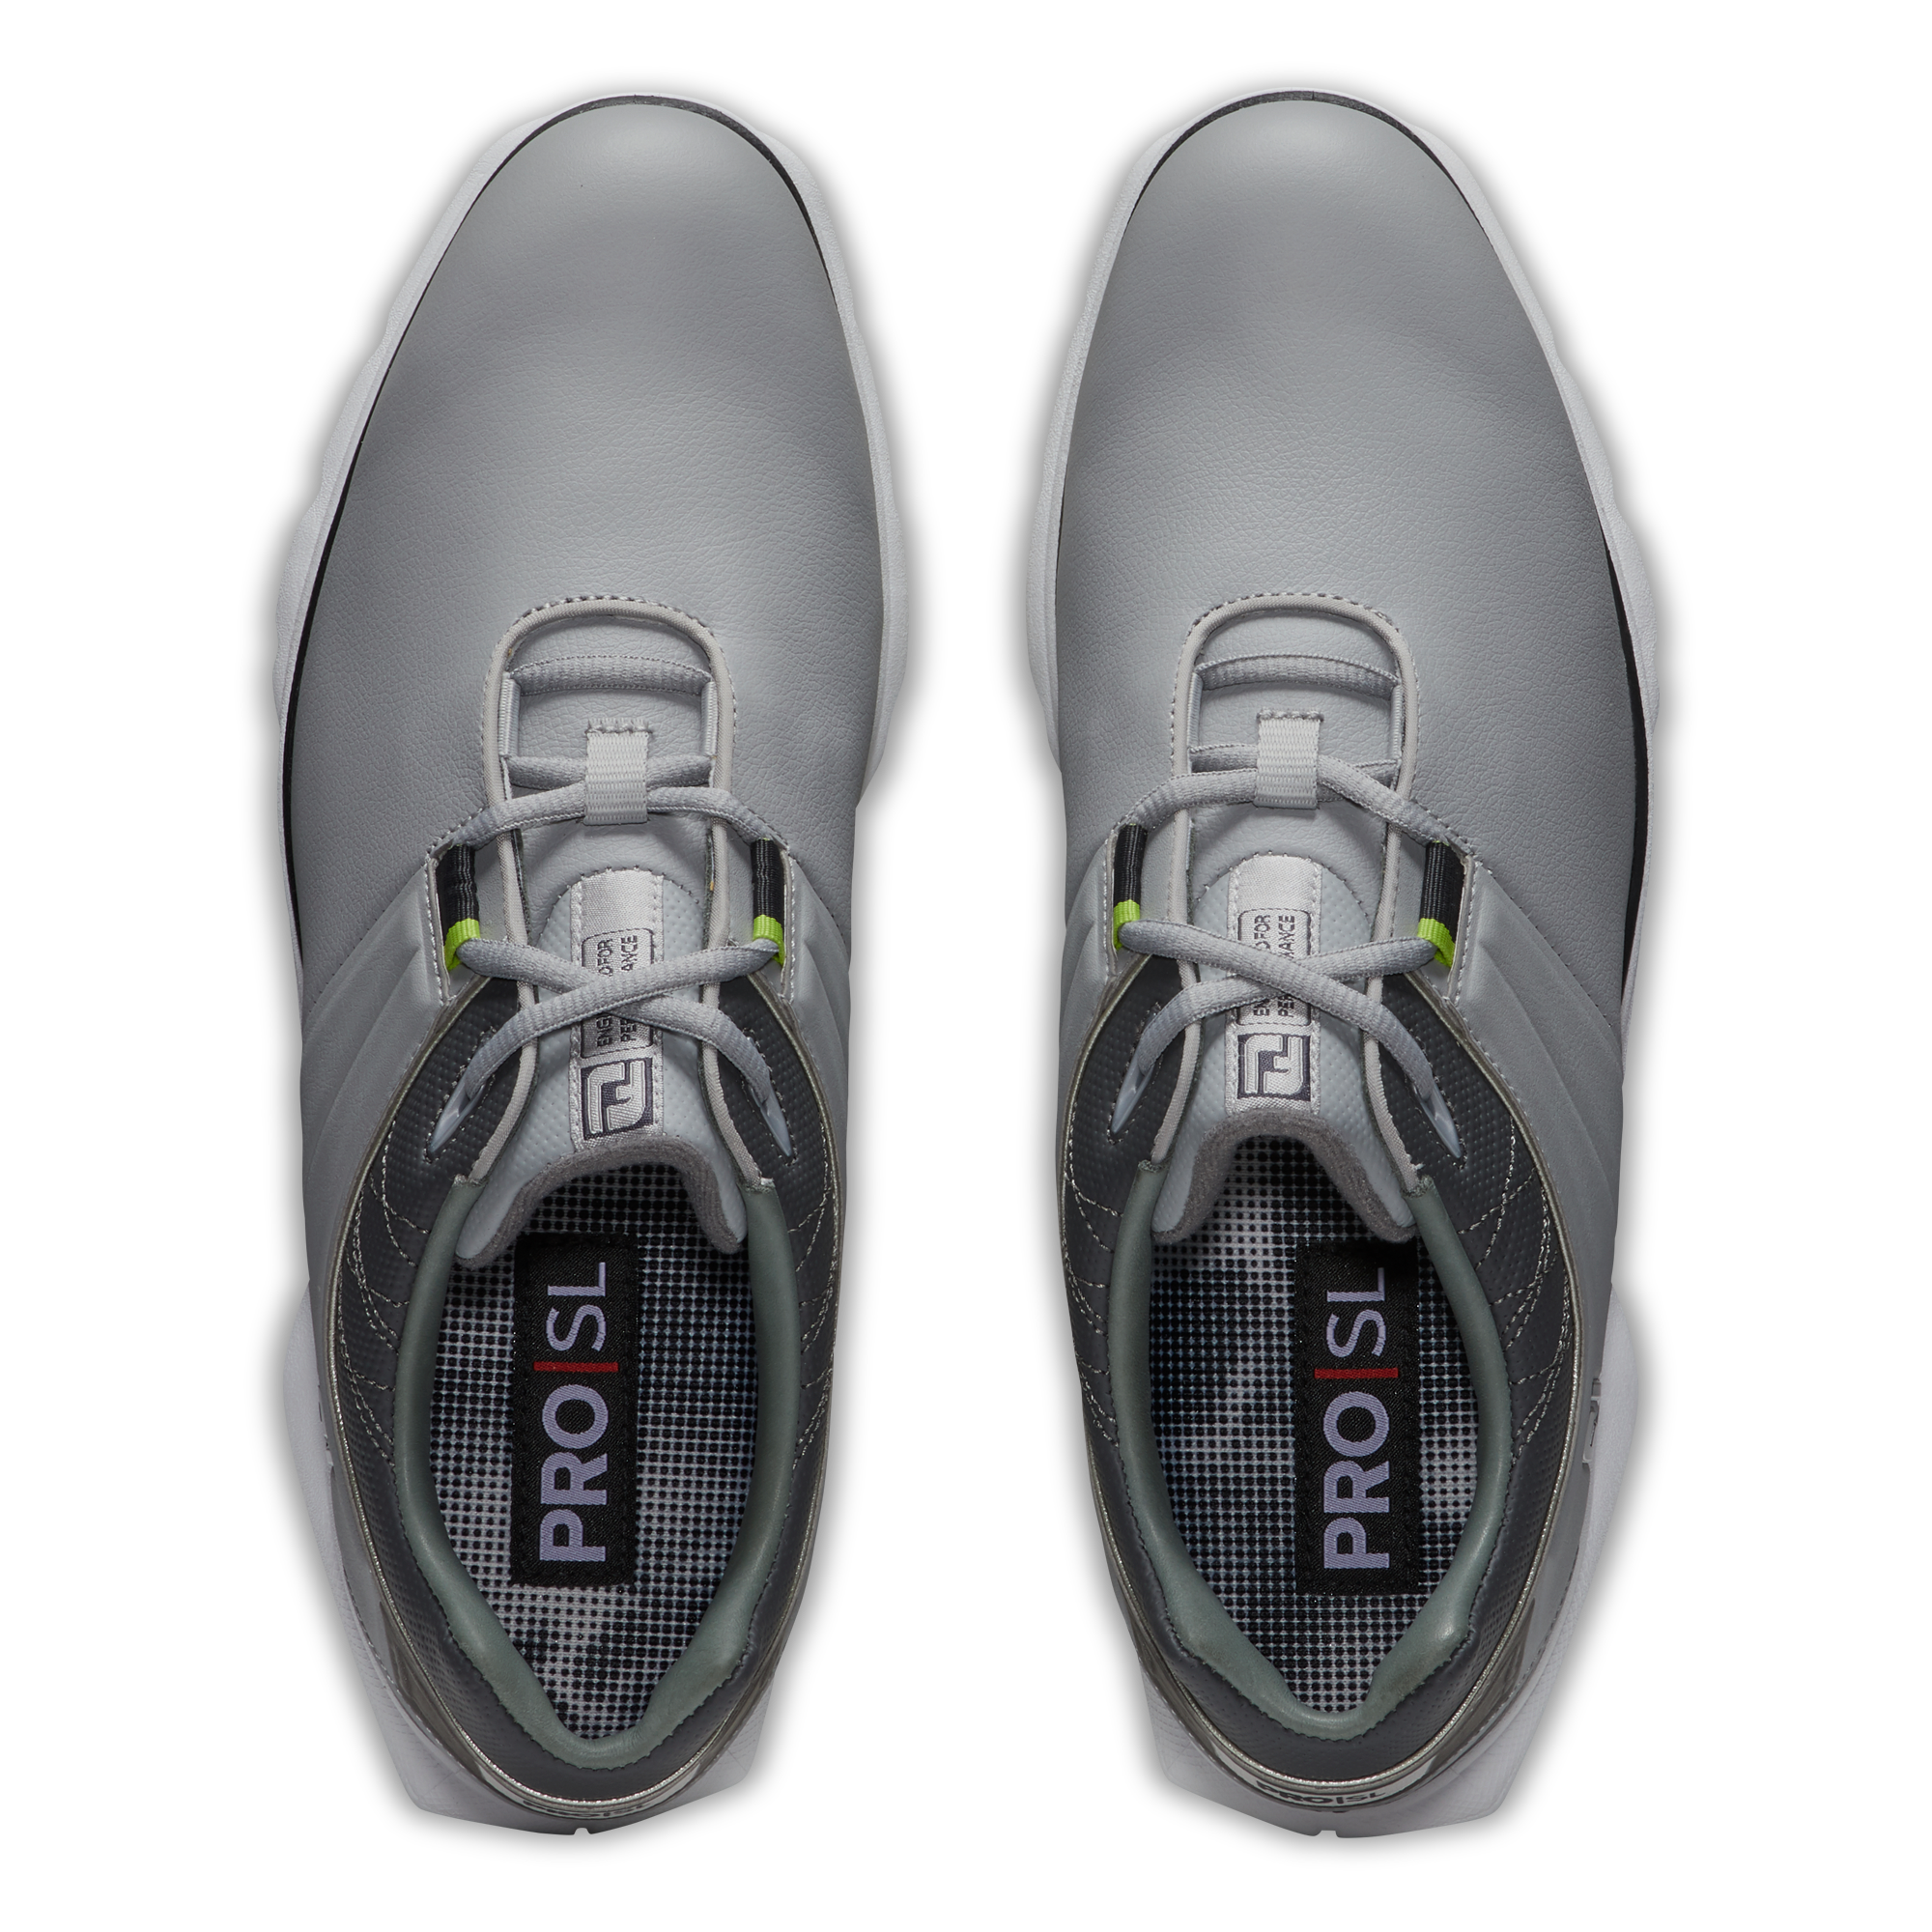 Pro|SL | Our Most Comfortable Spikeless Golf Shoes | FootJoy